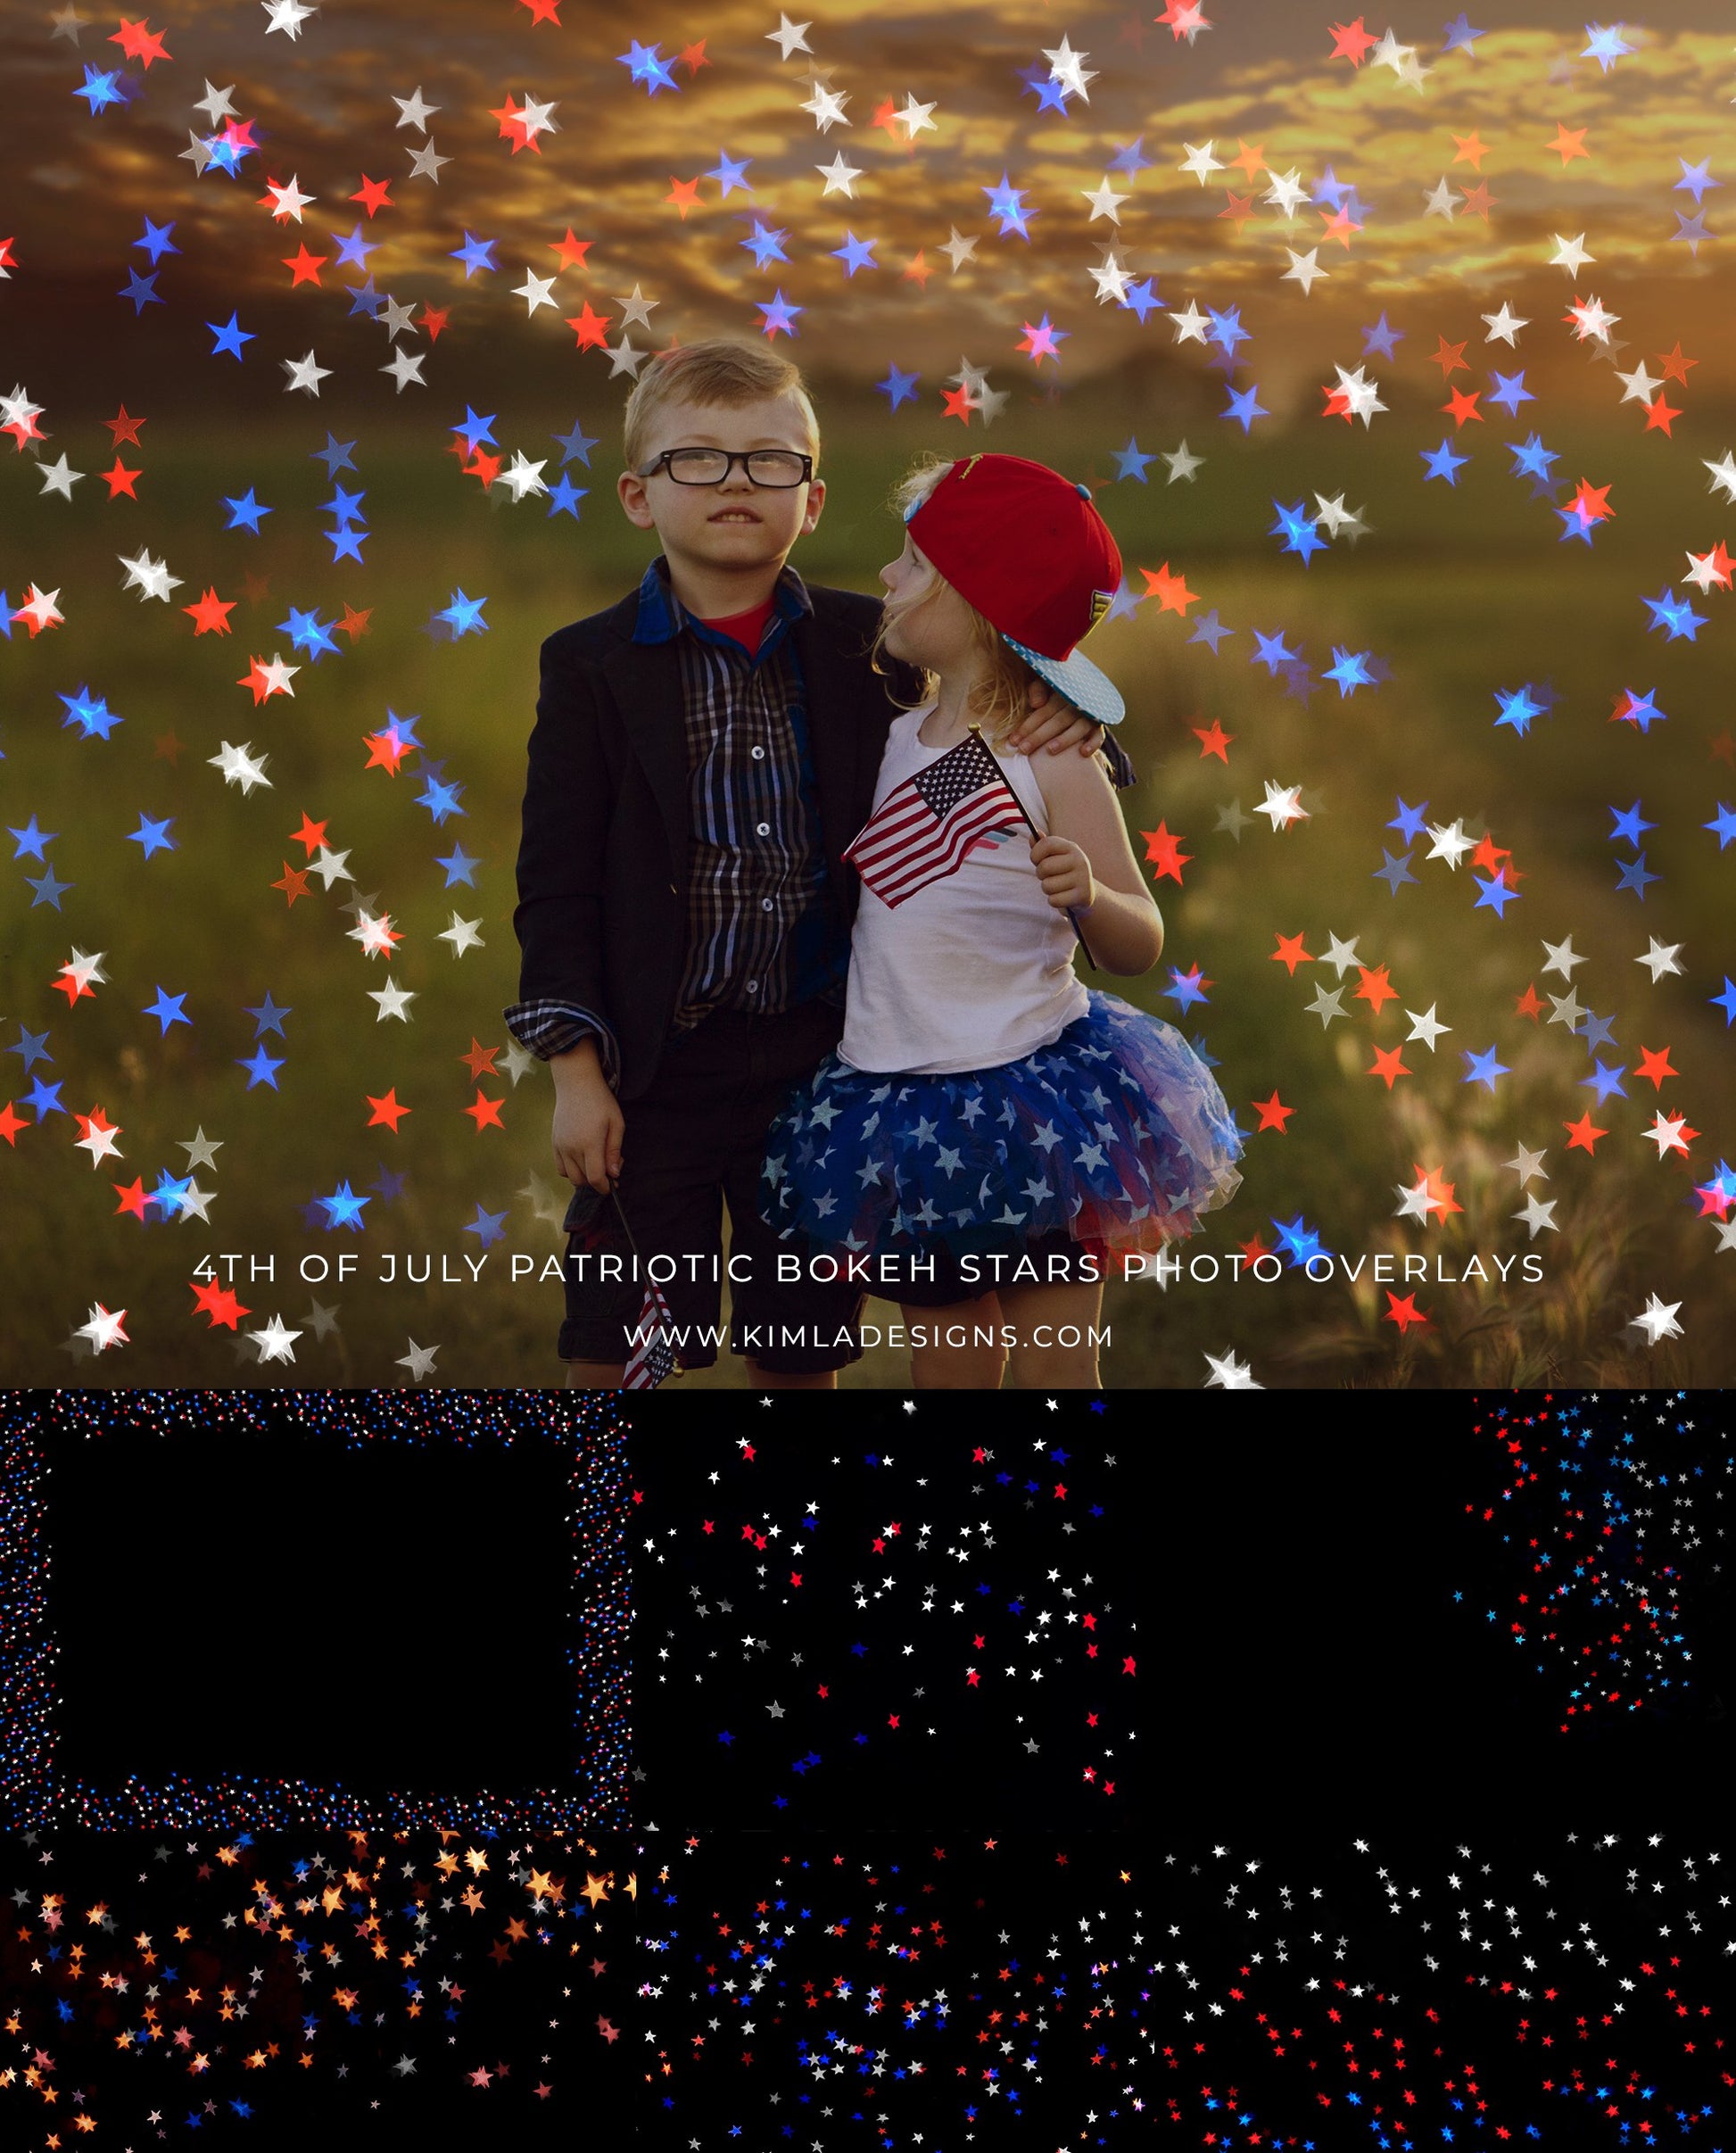 4th of July Patriotic Bokeh Stars Photoshop Overlays - Photoshop Overlays, Digital Backgrounds and Lightroom Presets